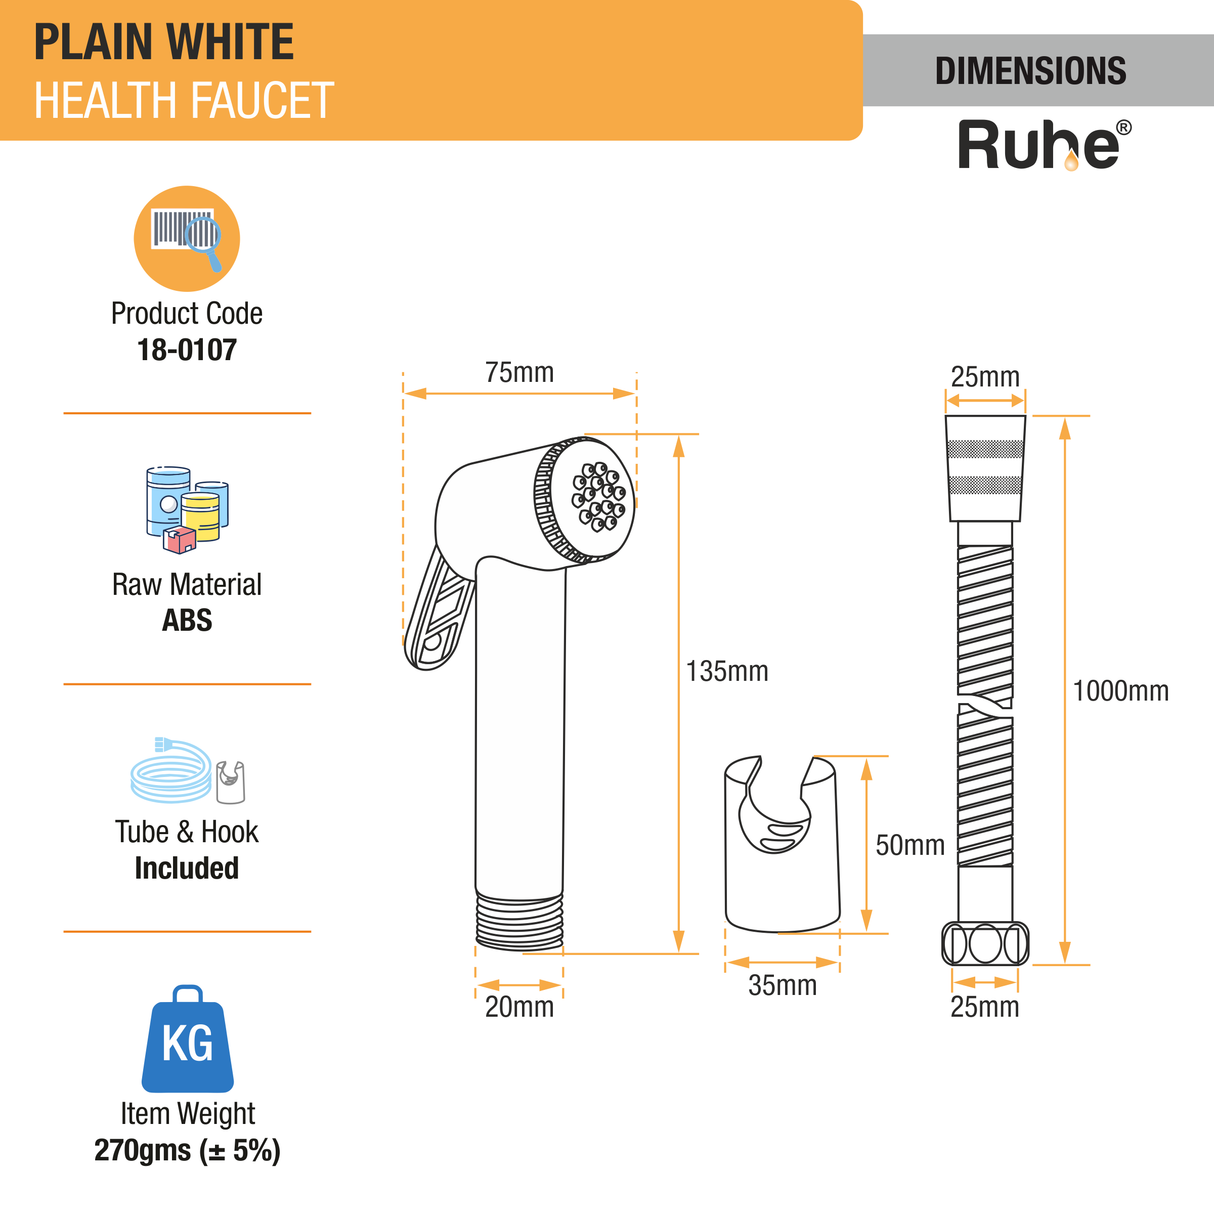 Plain White Health Faucet with Flexible Hose and Hook dimensions and size